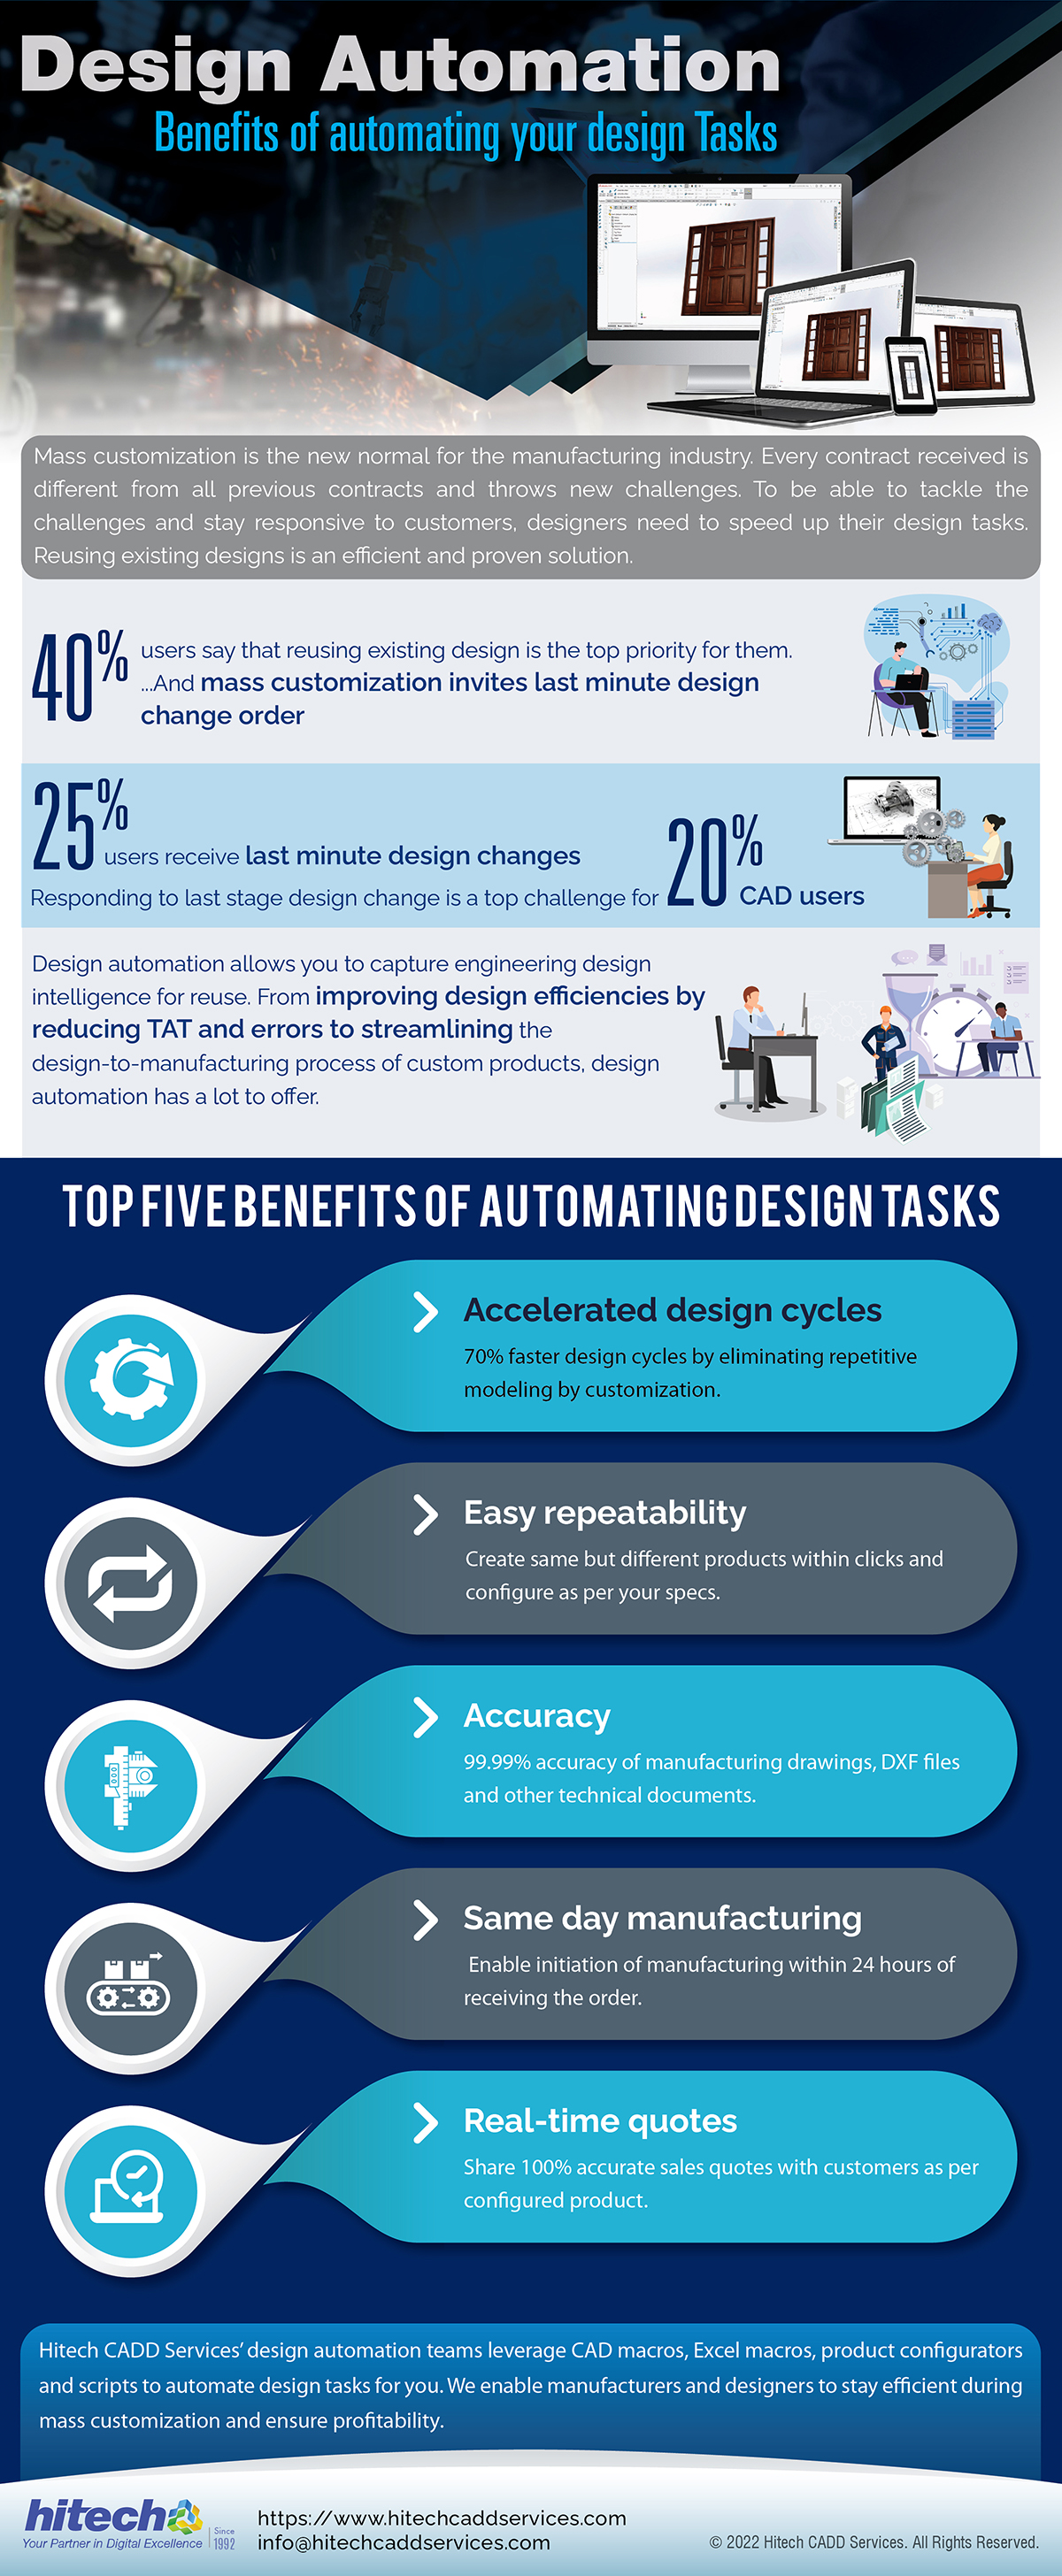 Design Automation
Benefits of automating your design Tasks

 

A) % users say that reusing existing design is the top priority for them & \%

And mass customization invites last minute design (
change order I

 

 

h

0 2»

users receive last minute design changes ] IK mol
CAD users

Responding to last stage design change is a top challenge for ) wd
Design automation allows you to capture engineering design

intelligence for reuse. From improving design efficiencies by € p
reducing TAT and errors to streamlining the .

| e
2 \ - 7 a
design-to-manufacturing process of custom products, design | © / we
automation has a lot to offer. hs
A

TOPFIVEBENEFITSOF AUTOMATING DESIGN TASKS

 

Accelerated design cycles

70% faster design cycles by eliminating repetitive
modeling by customization.

Easy repeatability
Create same but different products within clicks and
[SUE TITAN Te

>» Same day manufacturing

Enable initiation of manufacturing within 24 hours of
receiving the order.

Hitech CADD Services’ design automation teams leverage CAD macros, Excel macros, product configurators
and scripts to automate design tasks for you. We enable manufacturers and designers to stay efficient during
mass customization and ensure profitability.

 

hitech: A https: // www.hitechcaddservices.com

info@hitechcaddservices.com © 2022 Hitech CADD Services. All Rights Reserved